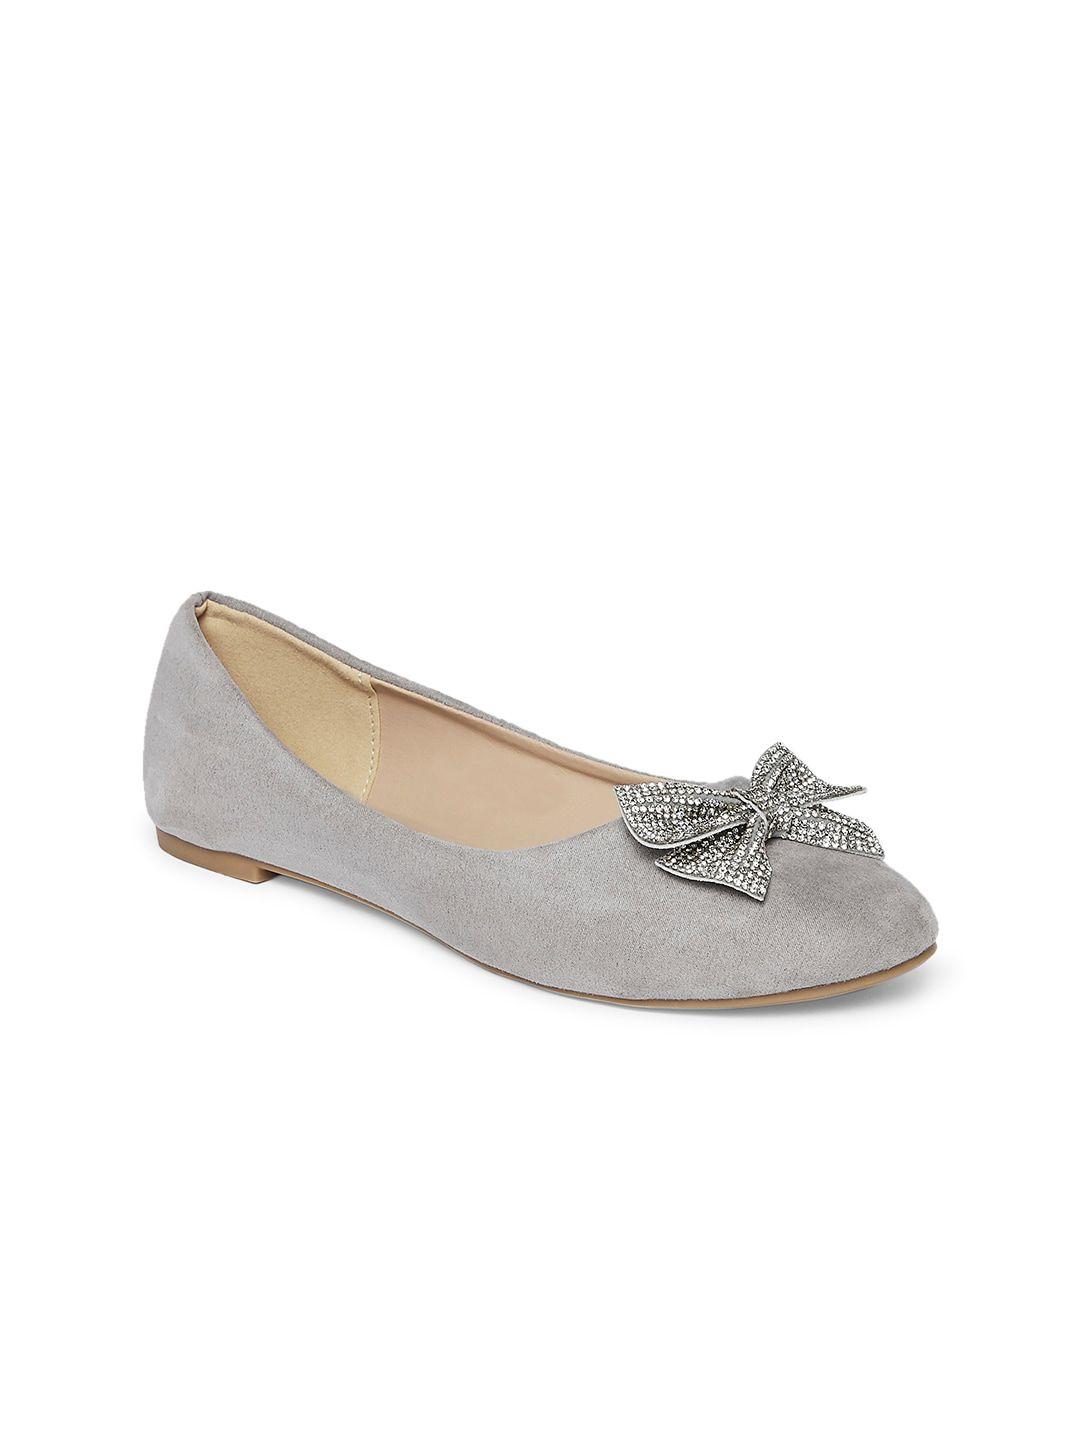 forever glam by pantaloons women taupe embellished ballerinas with bows flats